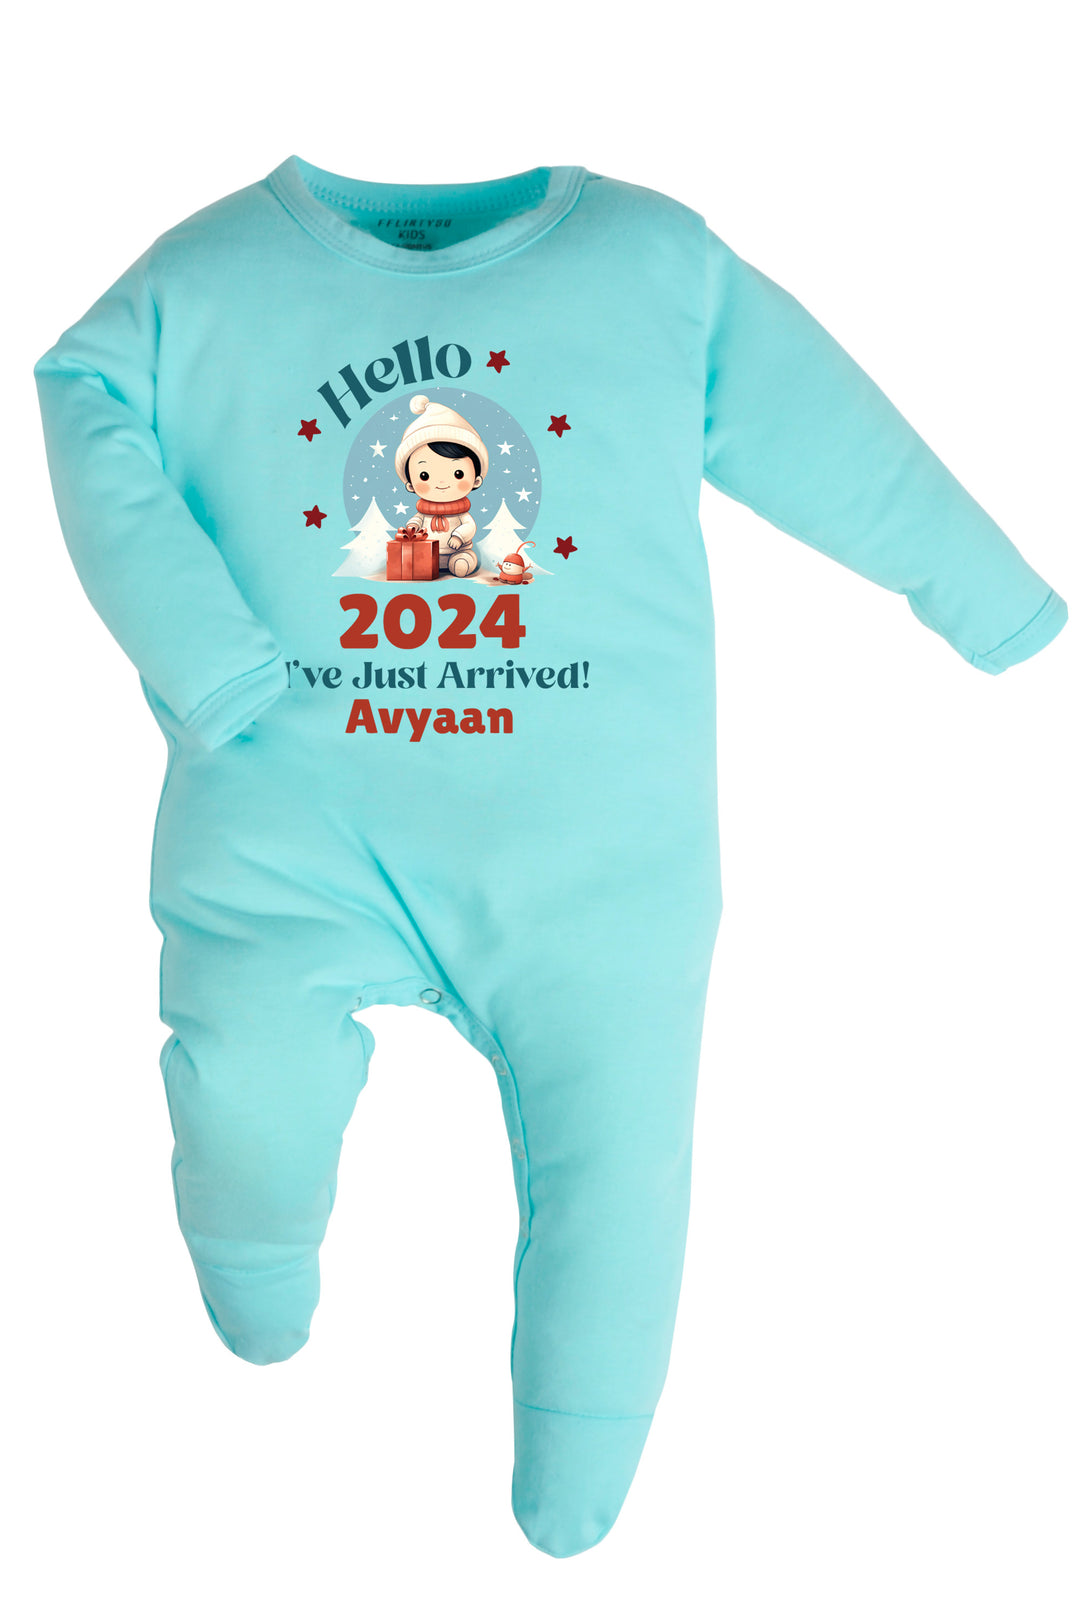 Hello 2024, I Have Just Arrived Baby Romper | Onesies w/ Custom Name